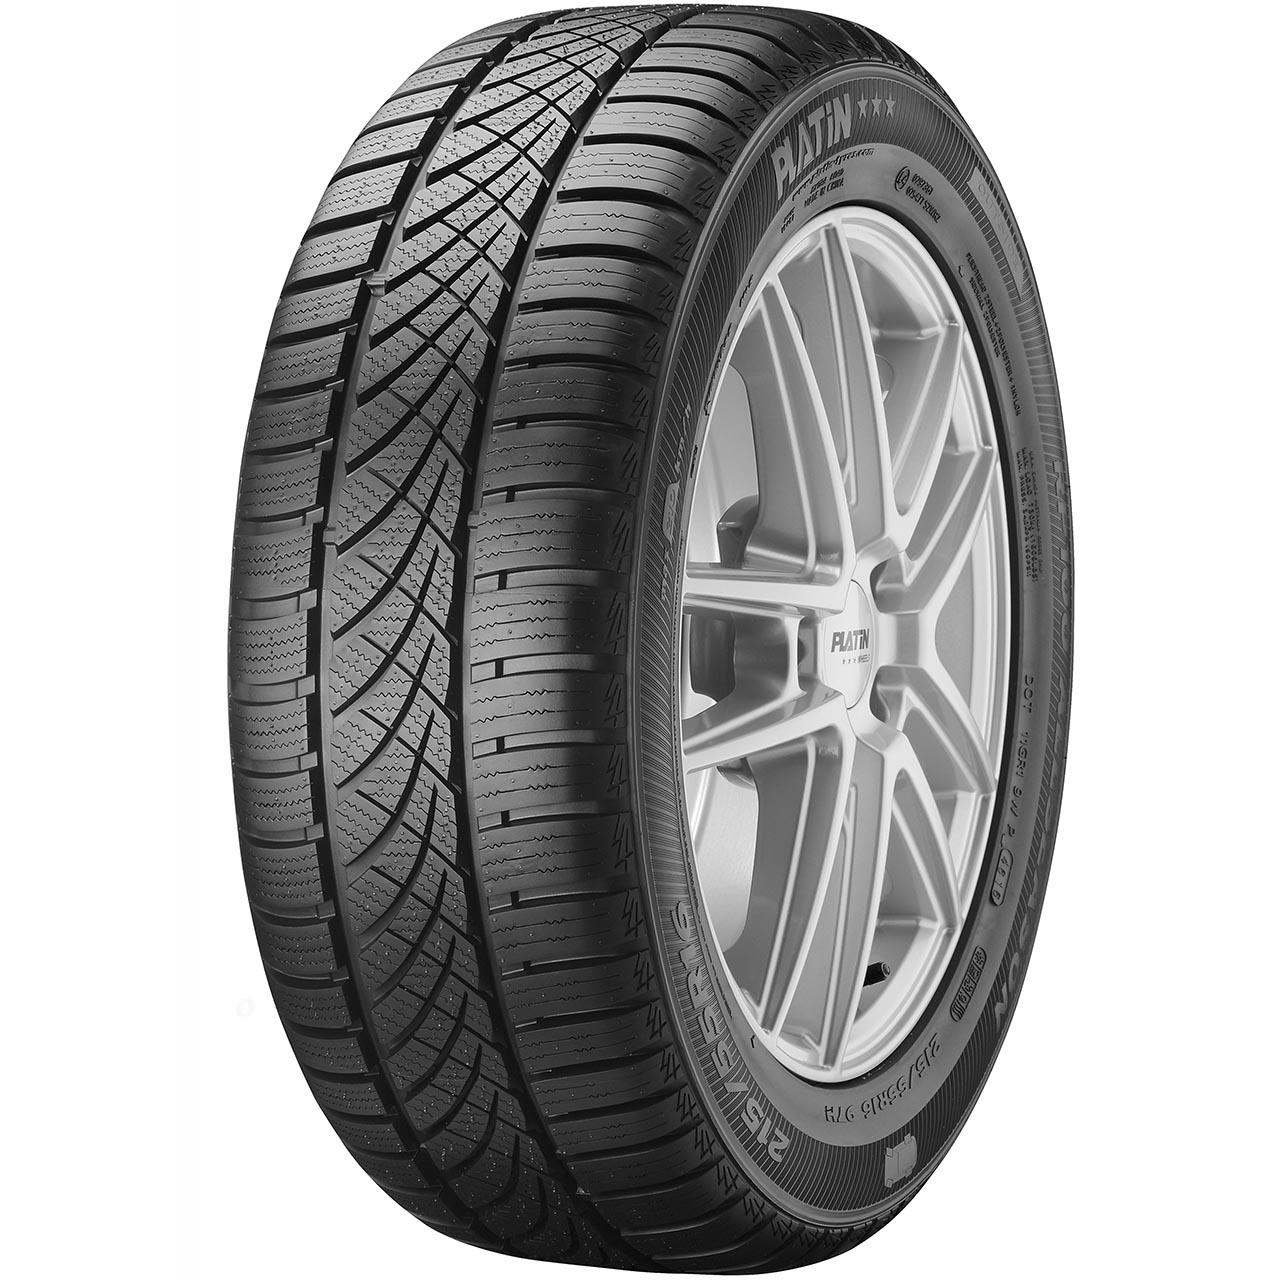 Gomme Nuove Platin 225/65 R17 102V RP100 AS M+S pneumatici nuovi All Season